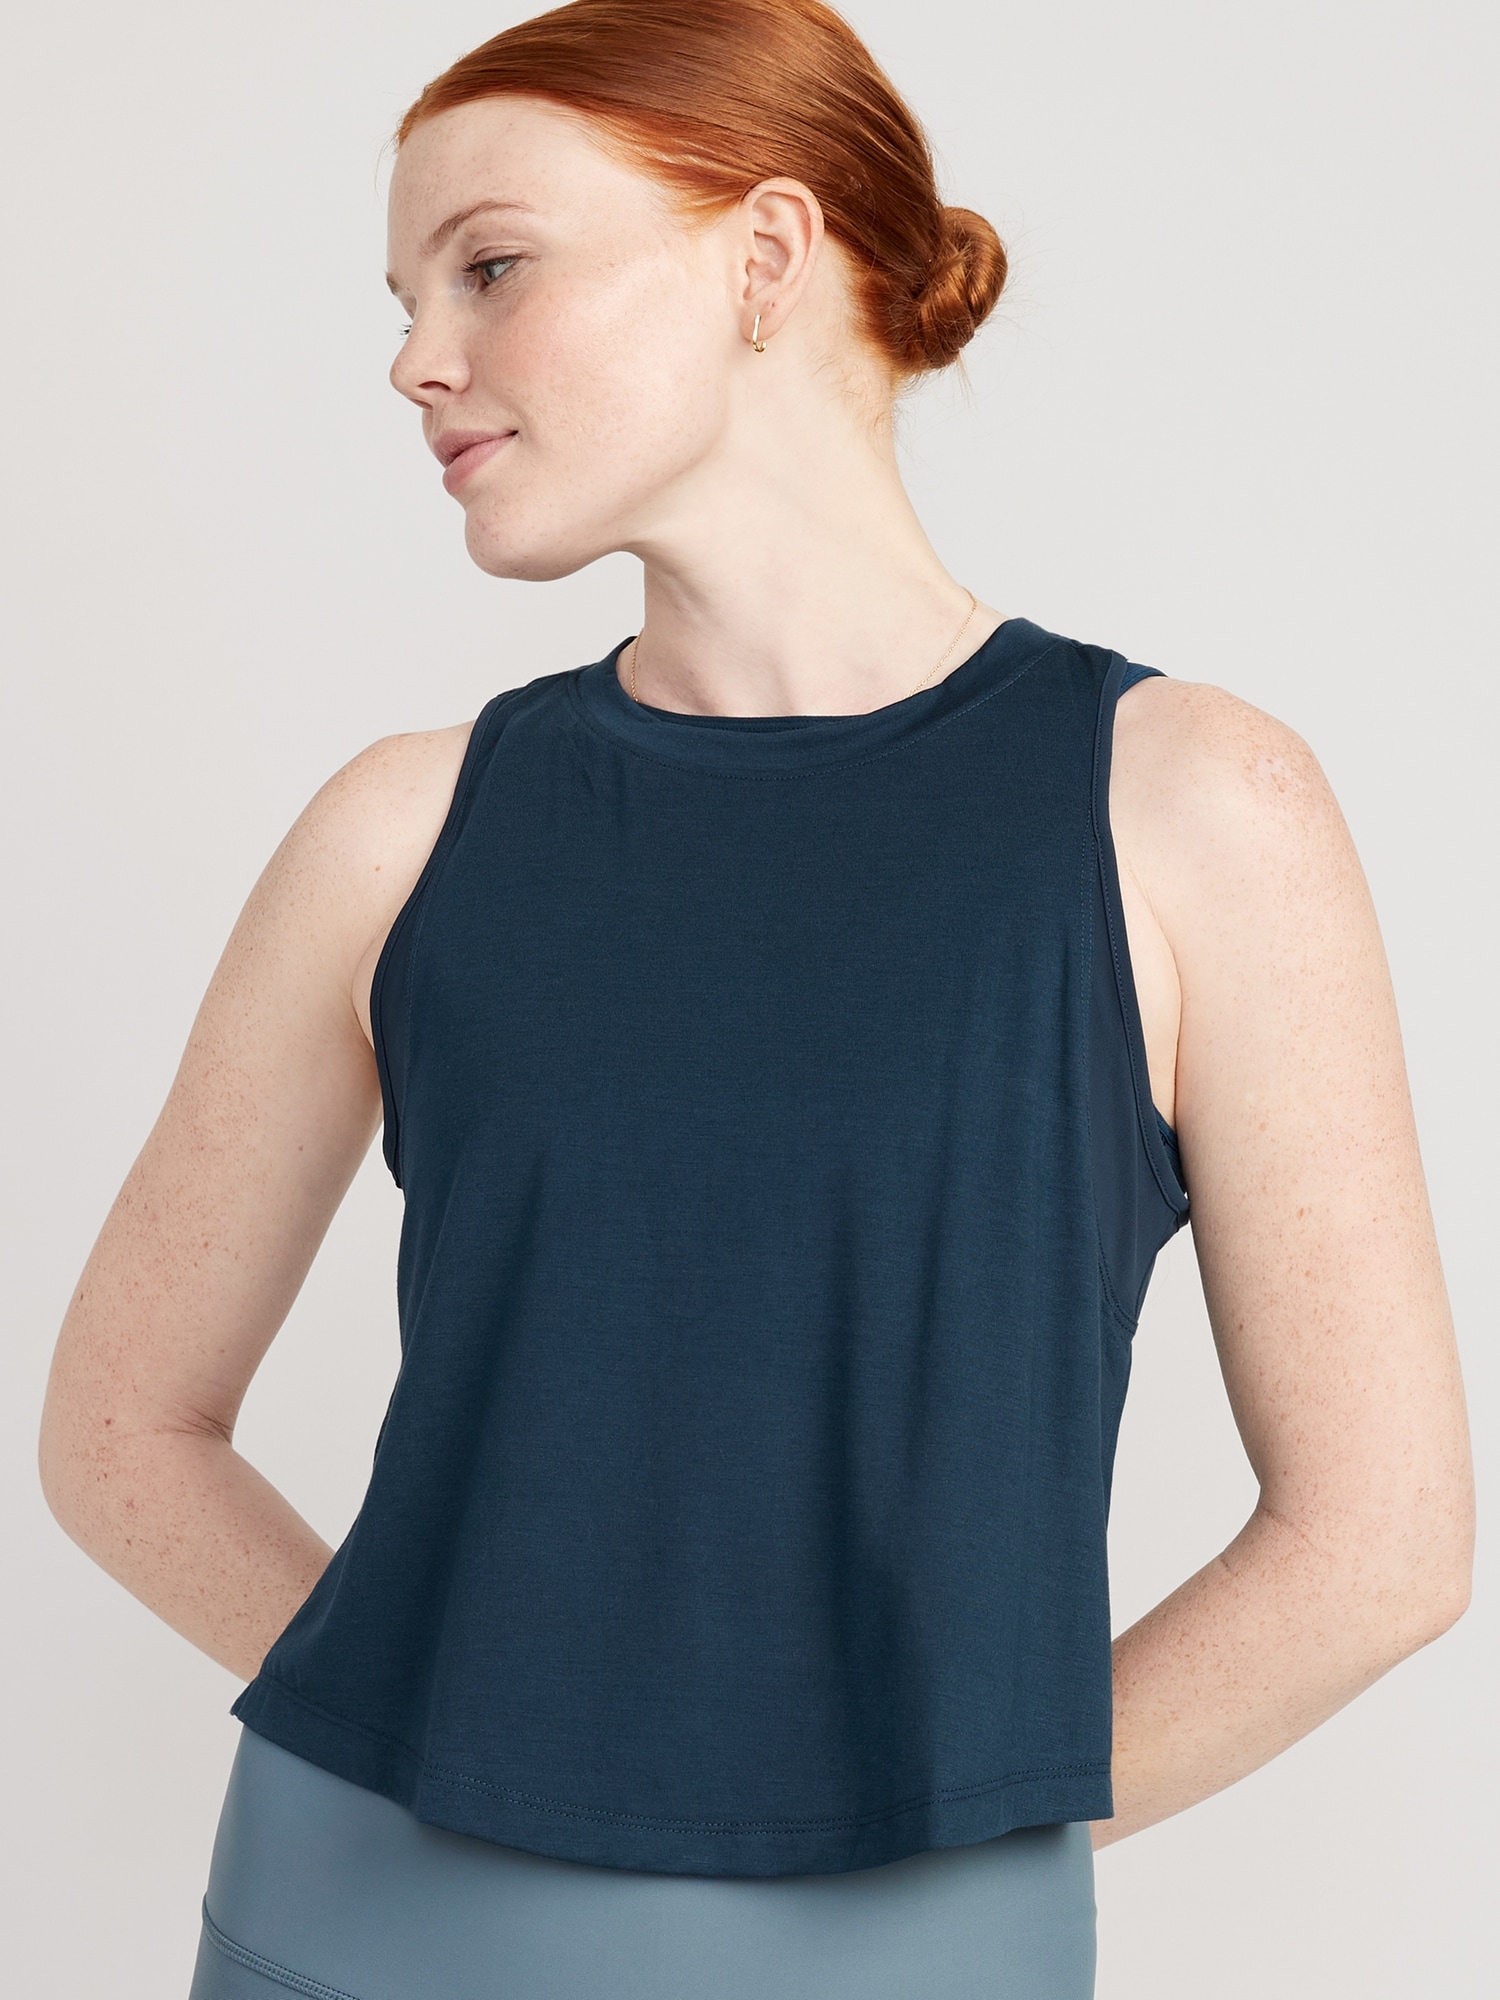 UltraLite All-Day Sleeveless Cropped Top for Women | Old Navy